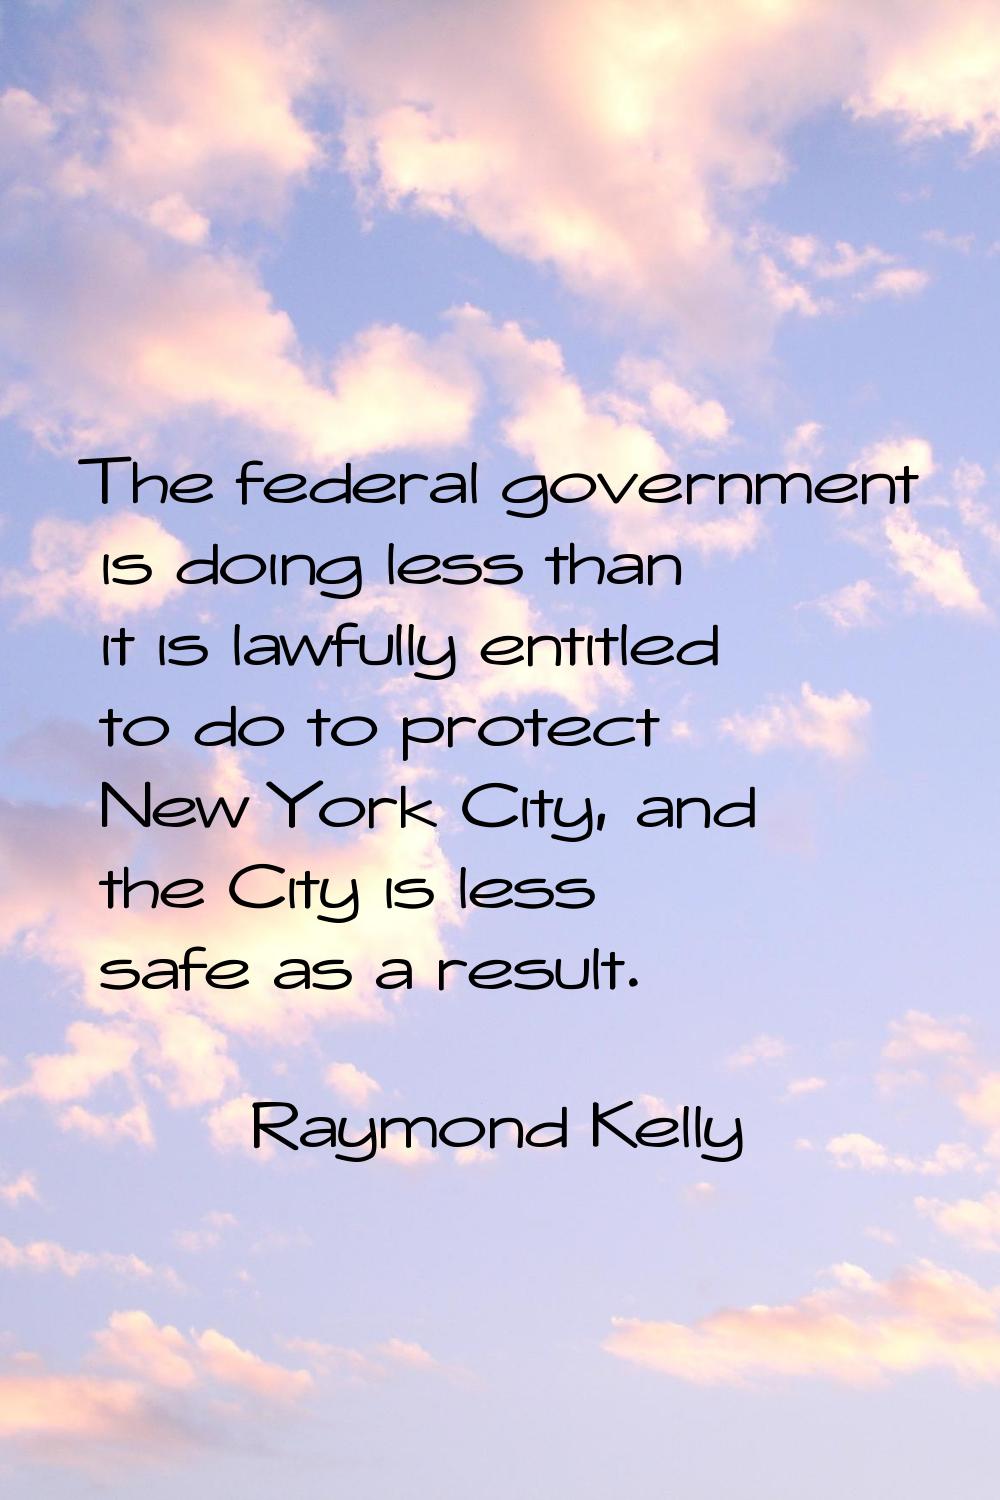 The federal government is doing less than it is lawfully entitled to do to protect New York City, a